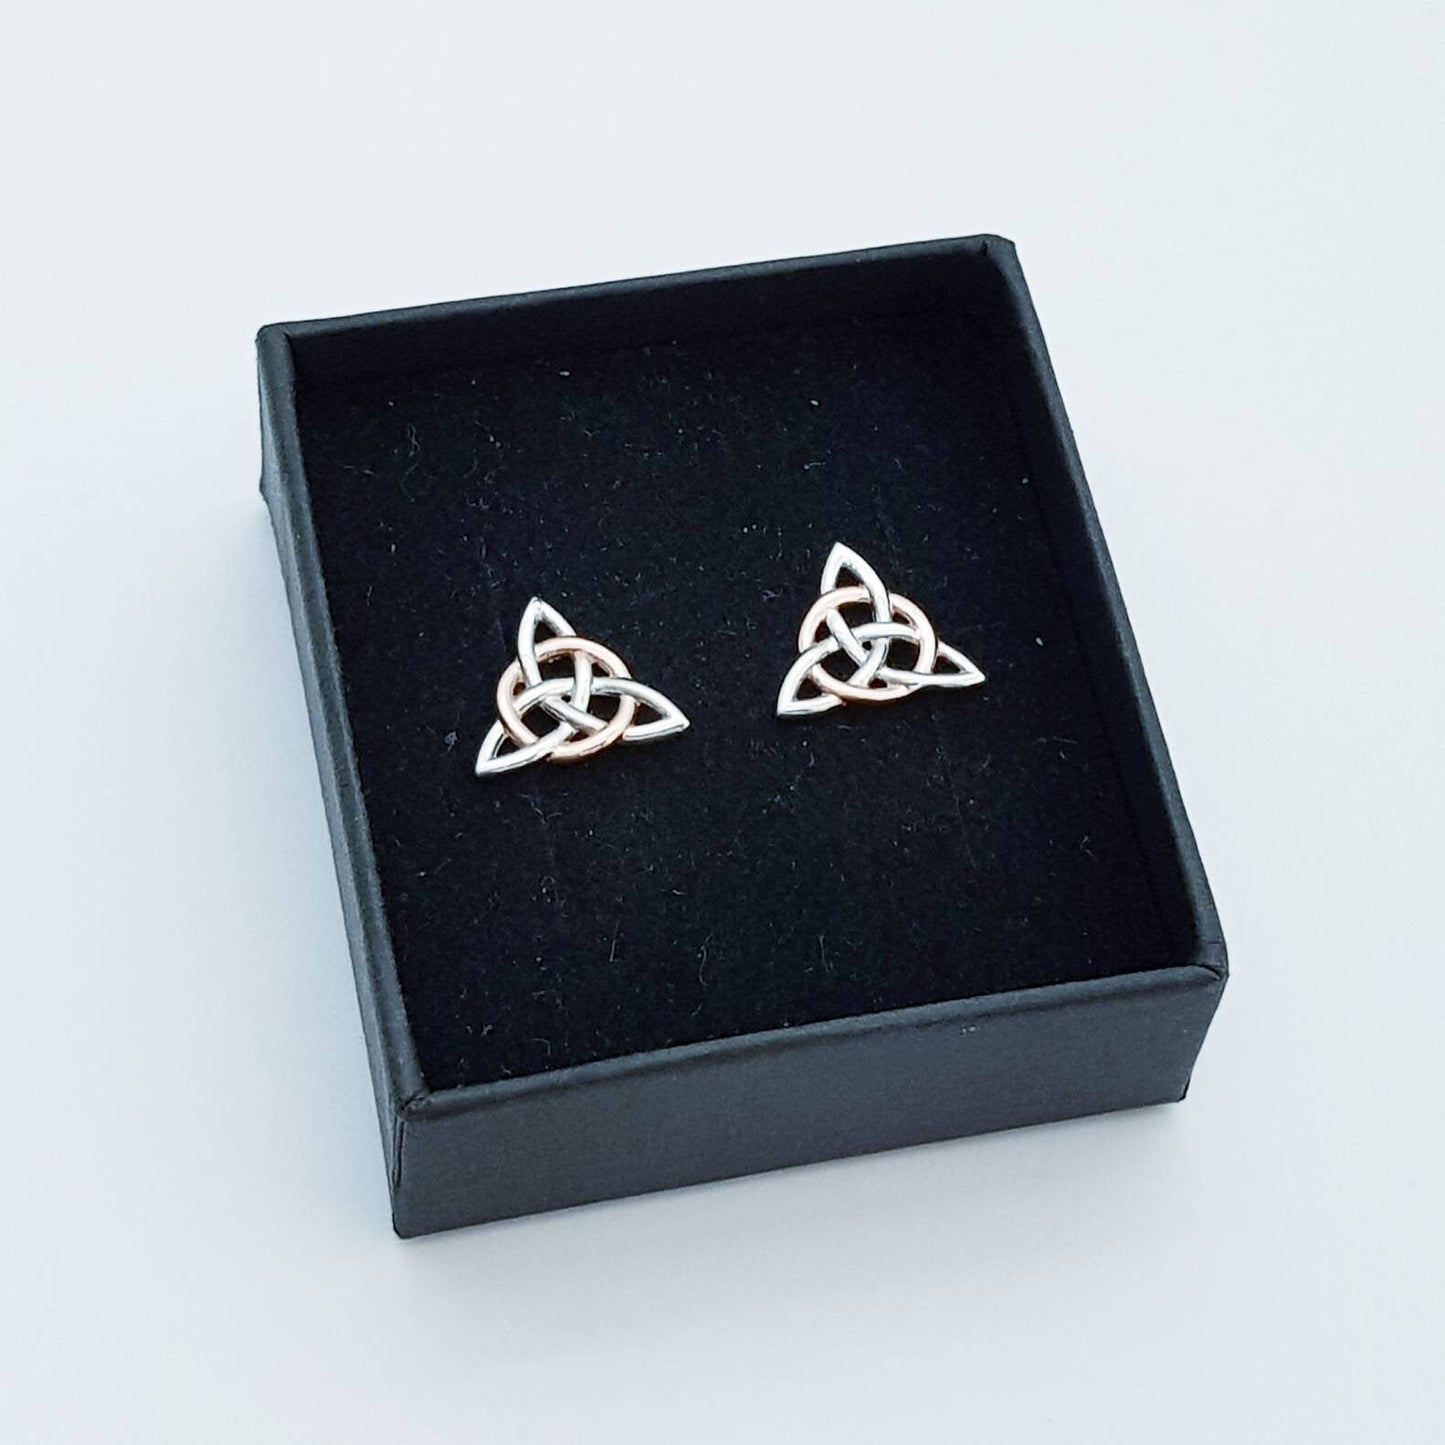 Celtic stud Earrings in silver with rose gold plating, triquetra earrings